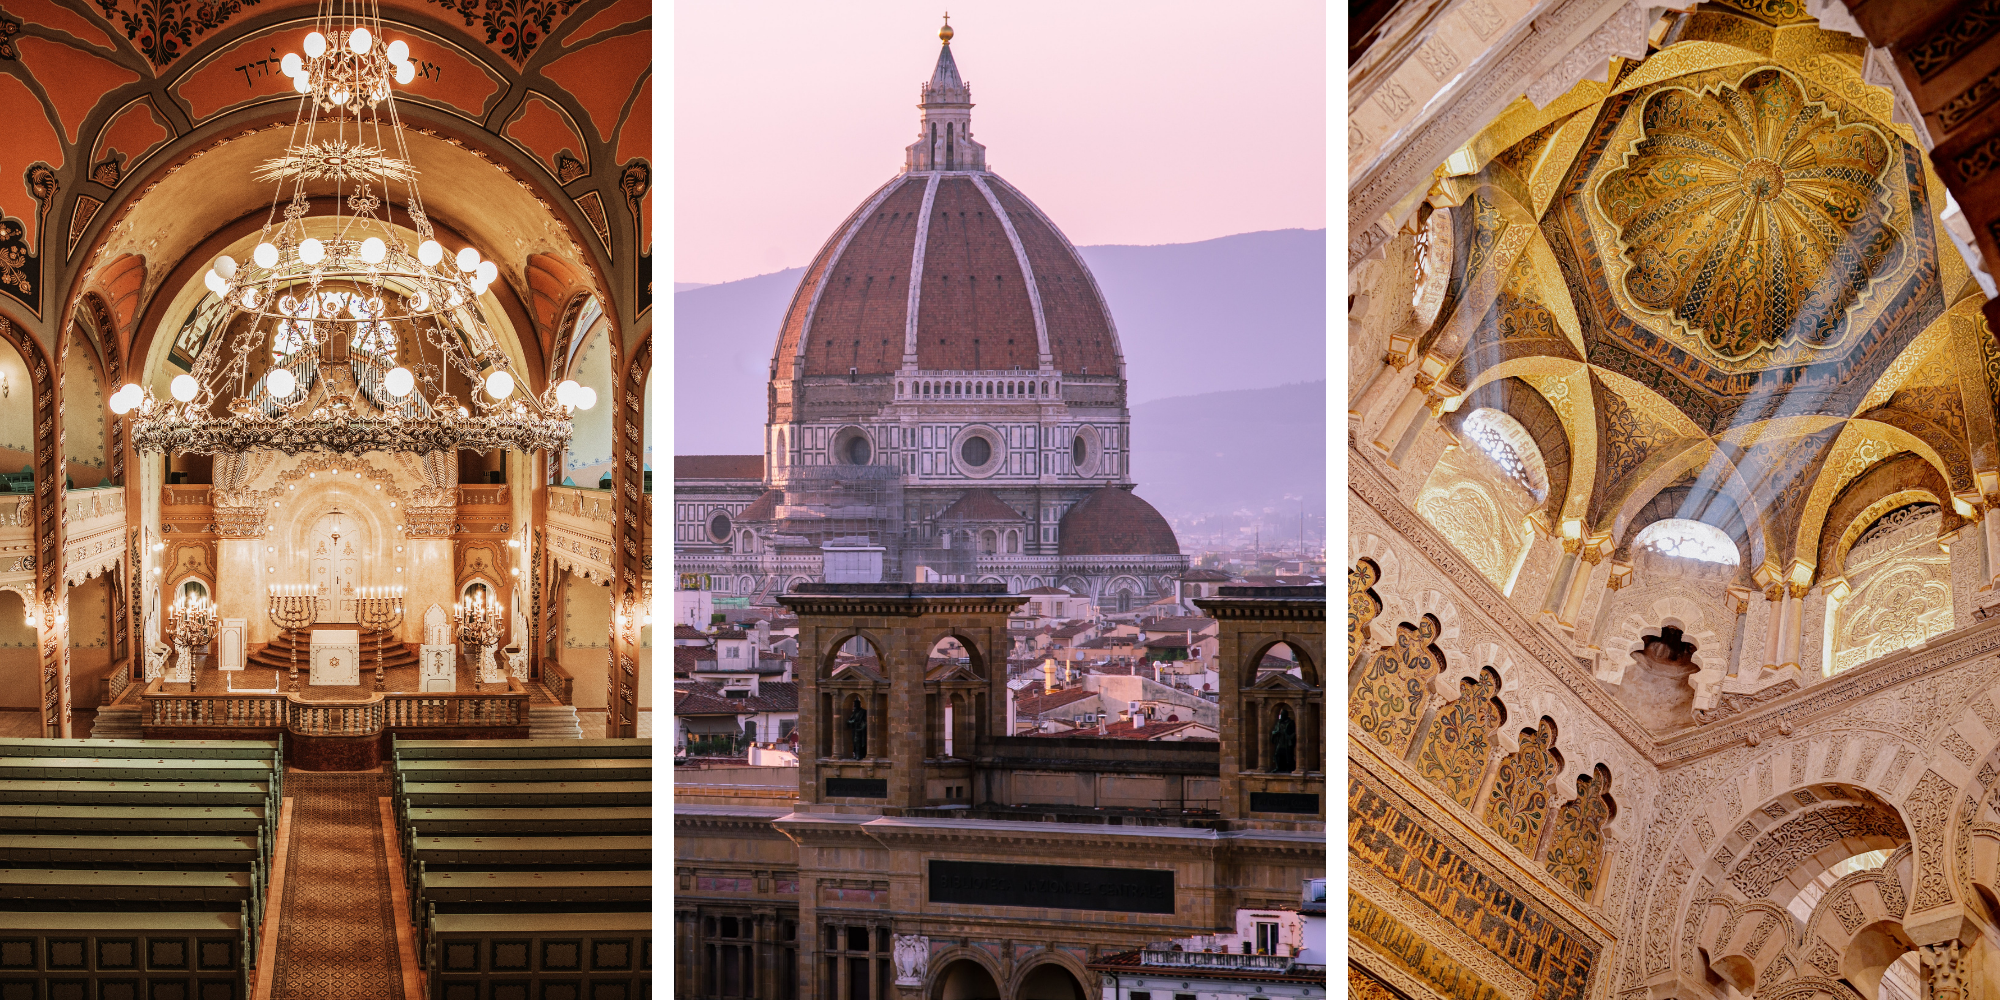 Just a few of the beautiful and historic places of worship you can find while studying abroad! Build your religious community abroad while on your Verto study abroad experience.